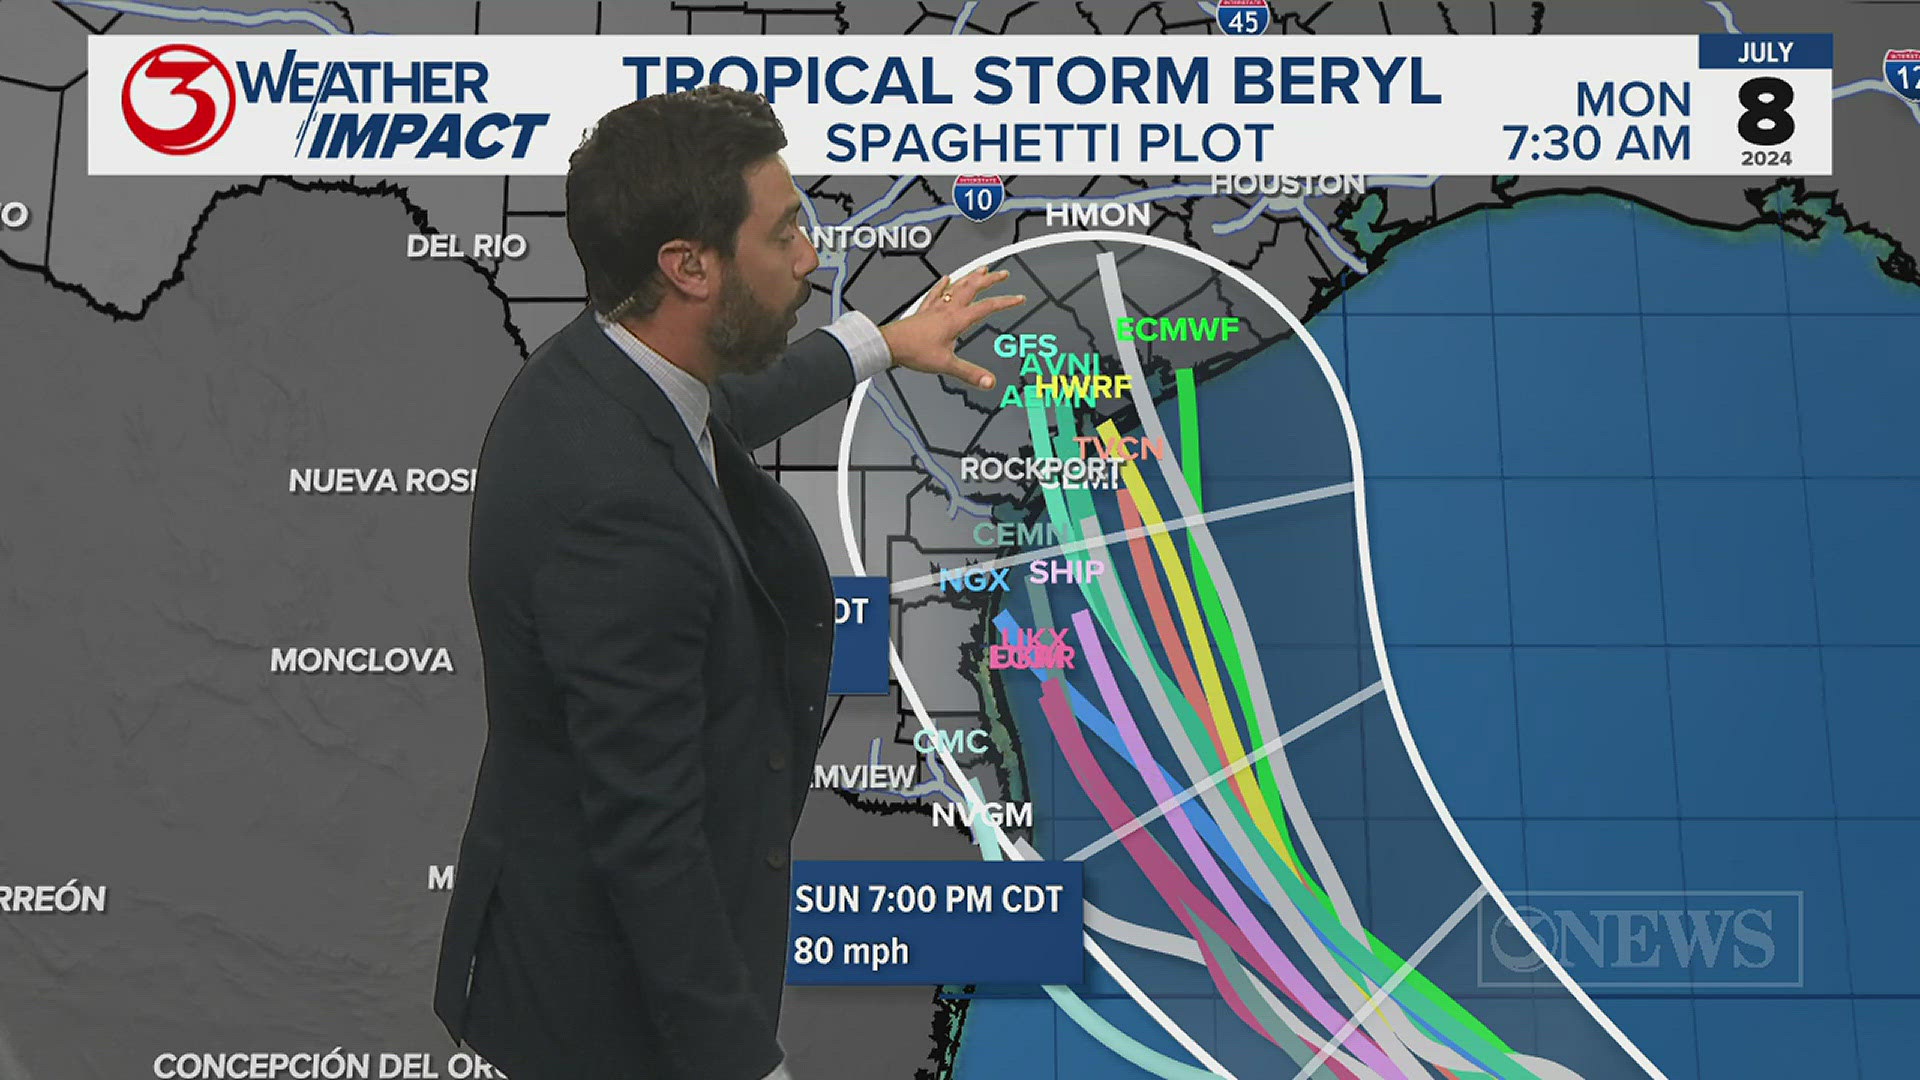 Will Beryl hit Corpus Christi? Our local meteorologists discuss the model trends and potential impacts to the Coastal Bend.